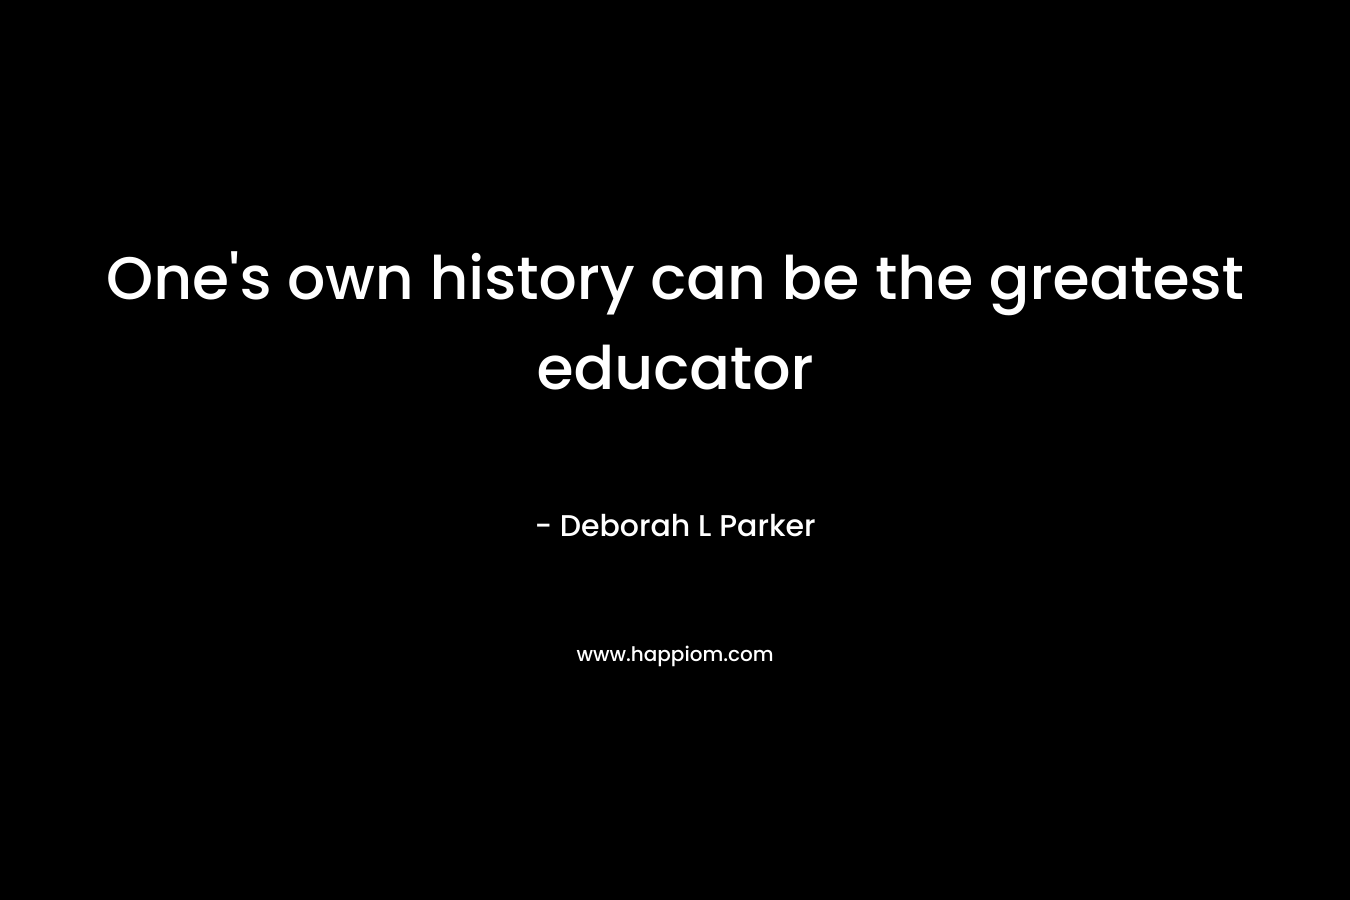 One's own history can be the greatest educator